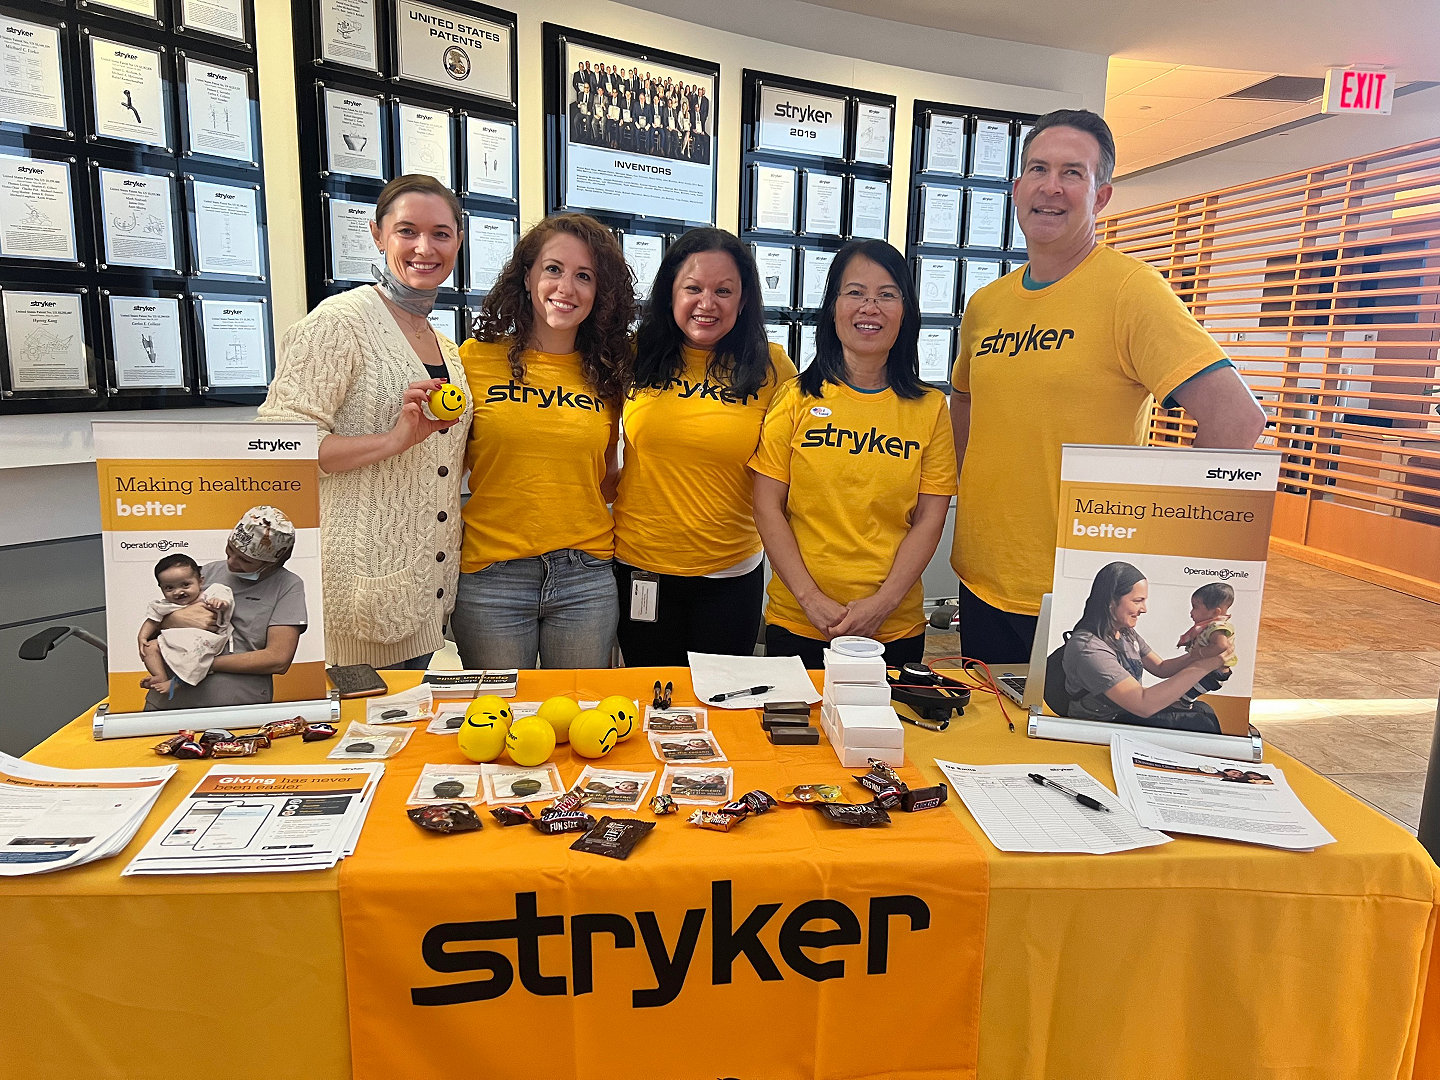 Stryker employees fundraising for Operation Smile